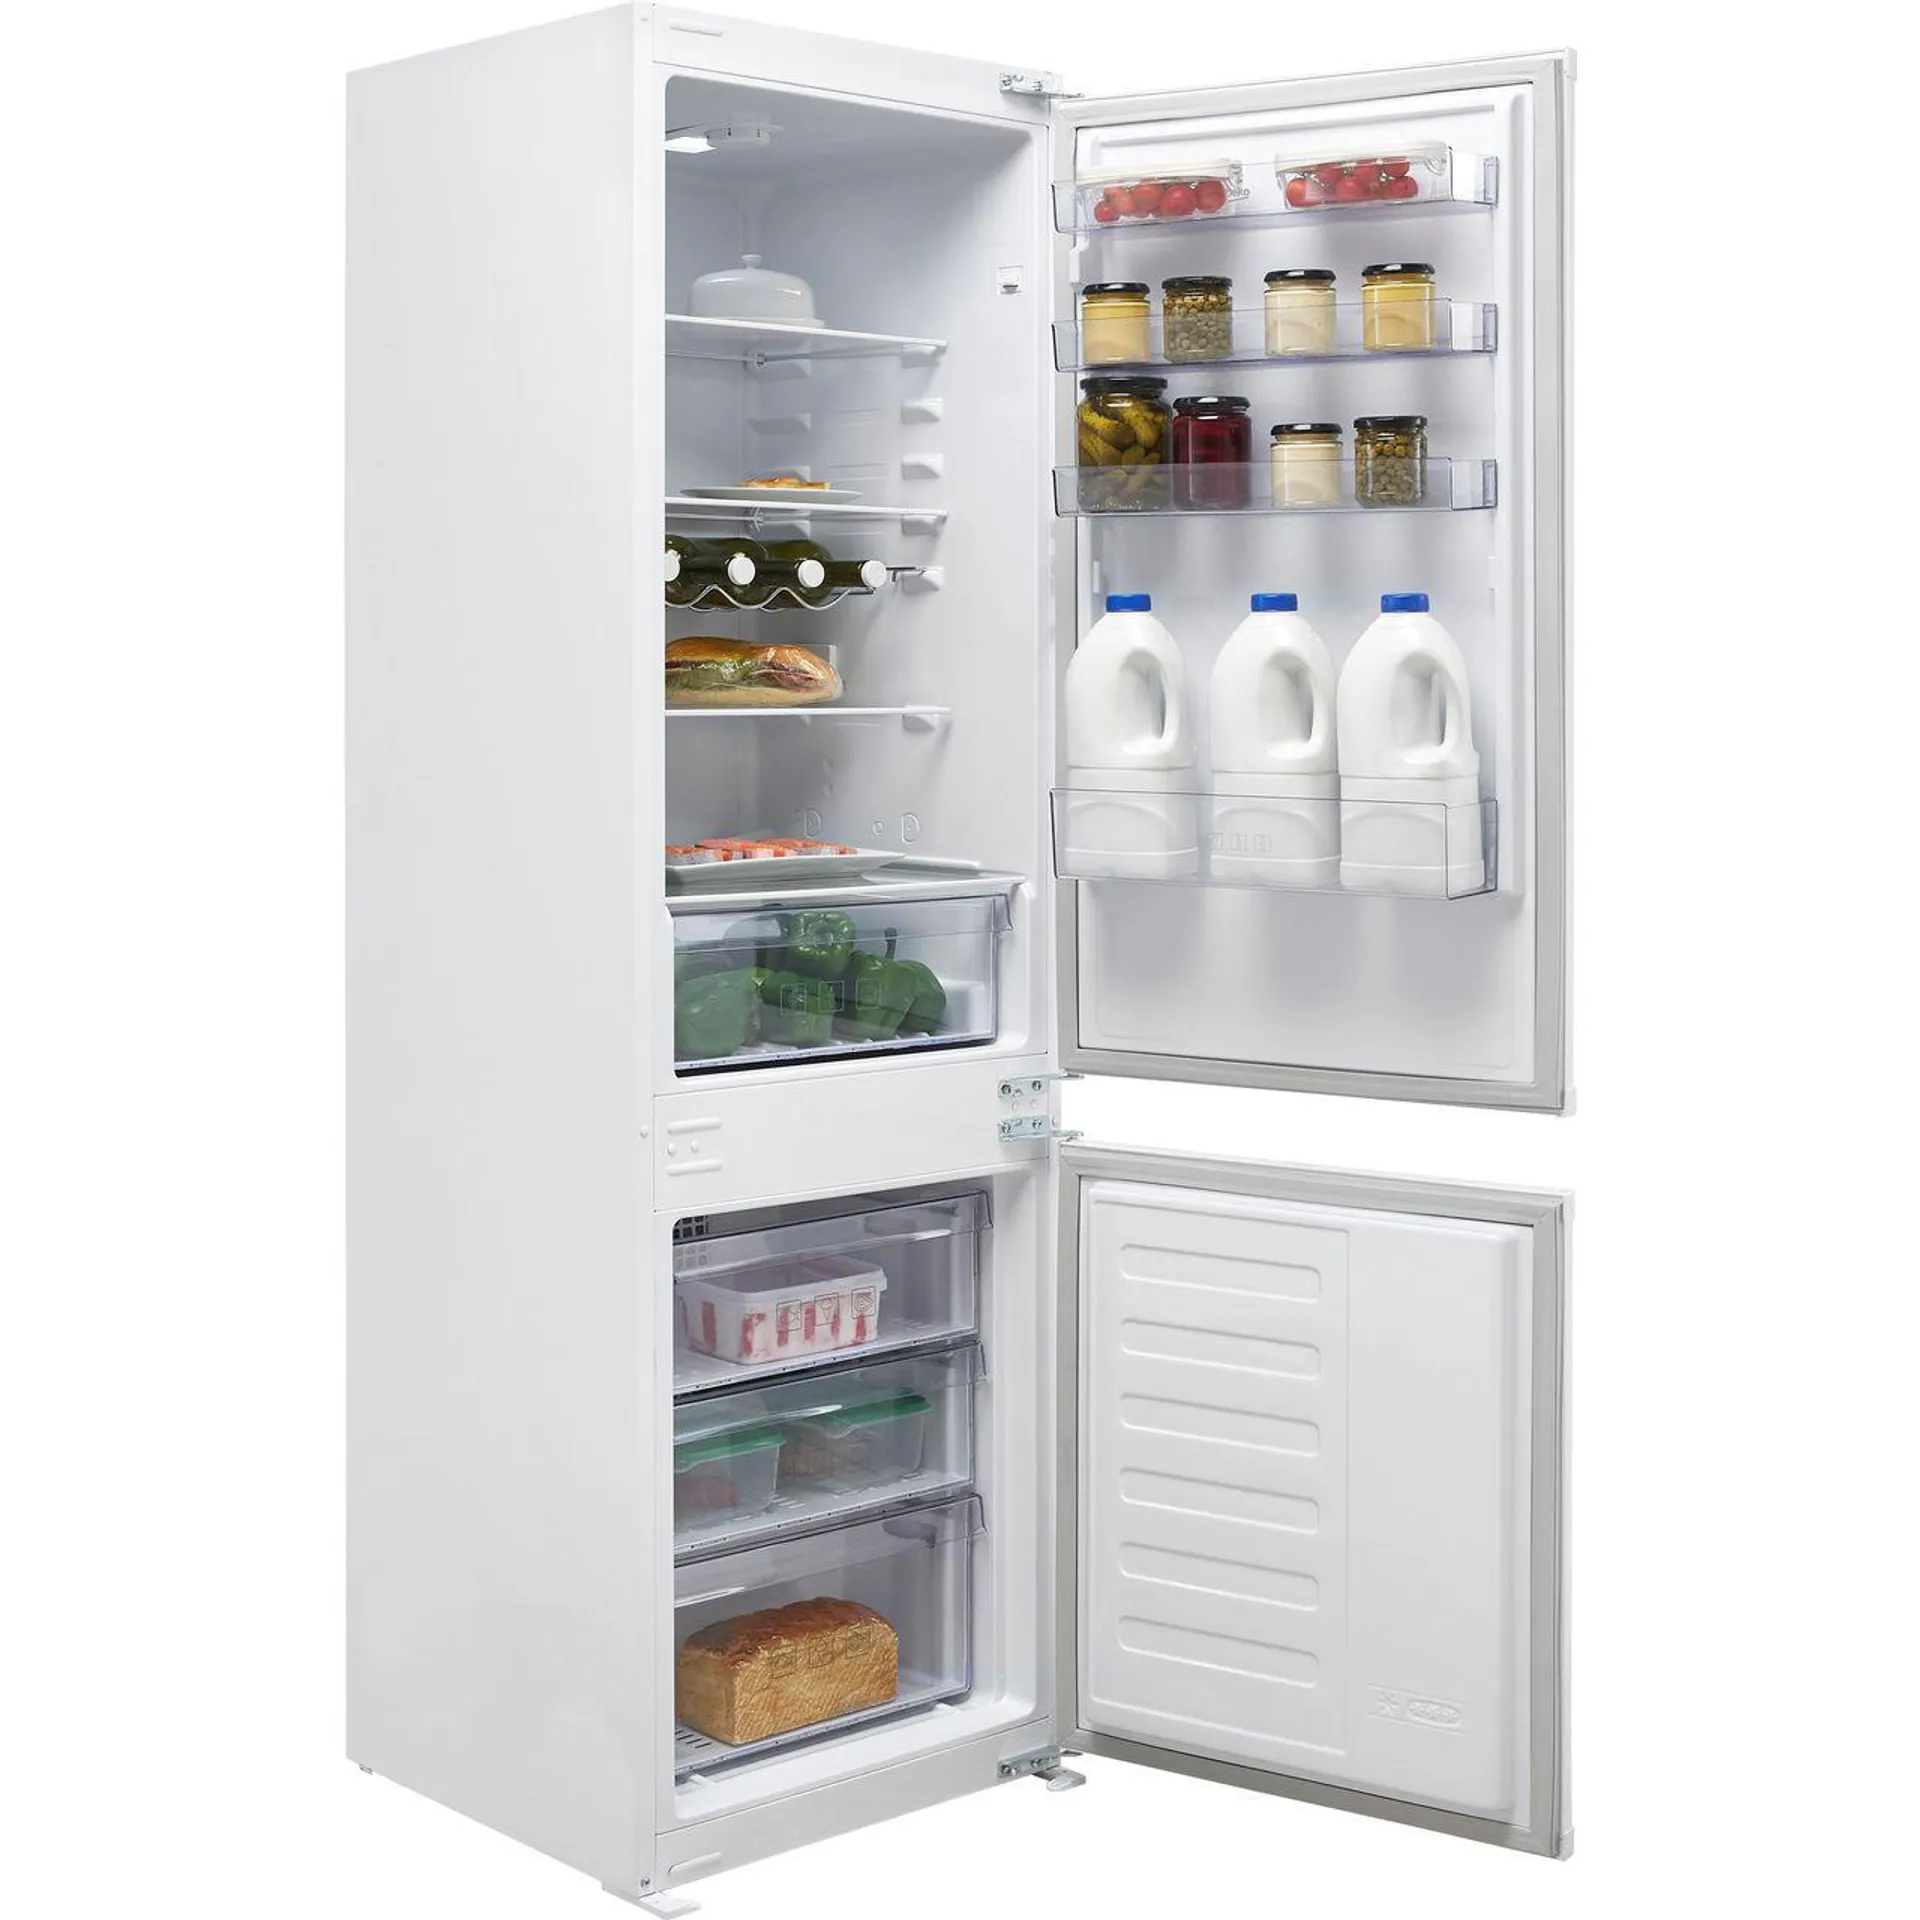 Beko BCFD373 Integrated 70/30 Frost Free Fridge Freezer with Sliding Door Fixing Kit - White - F Rated